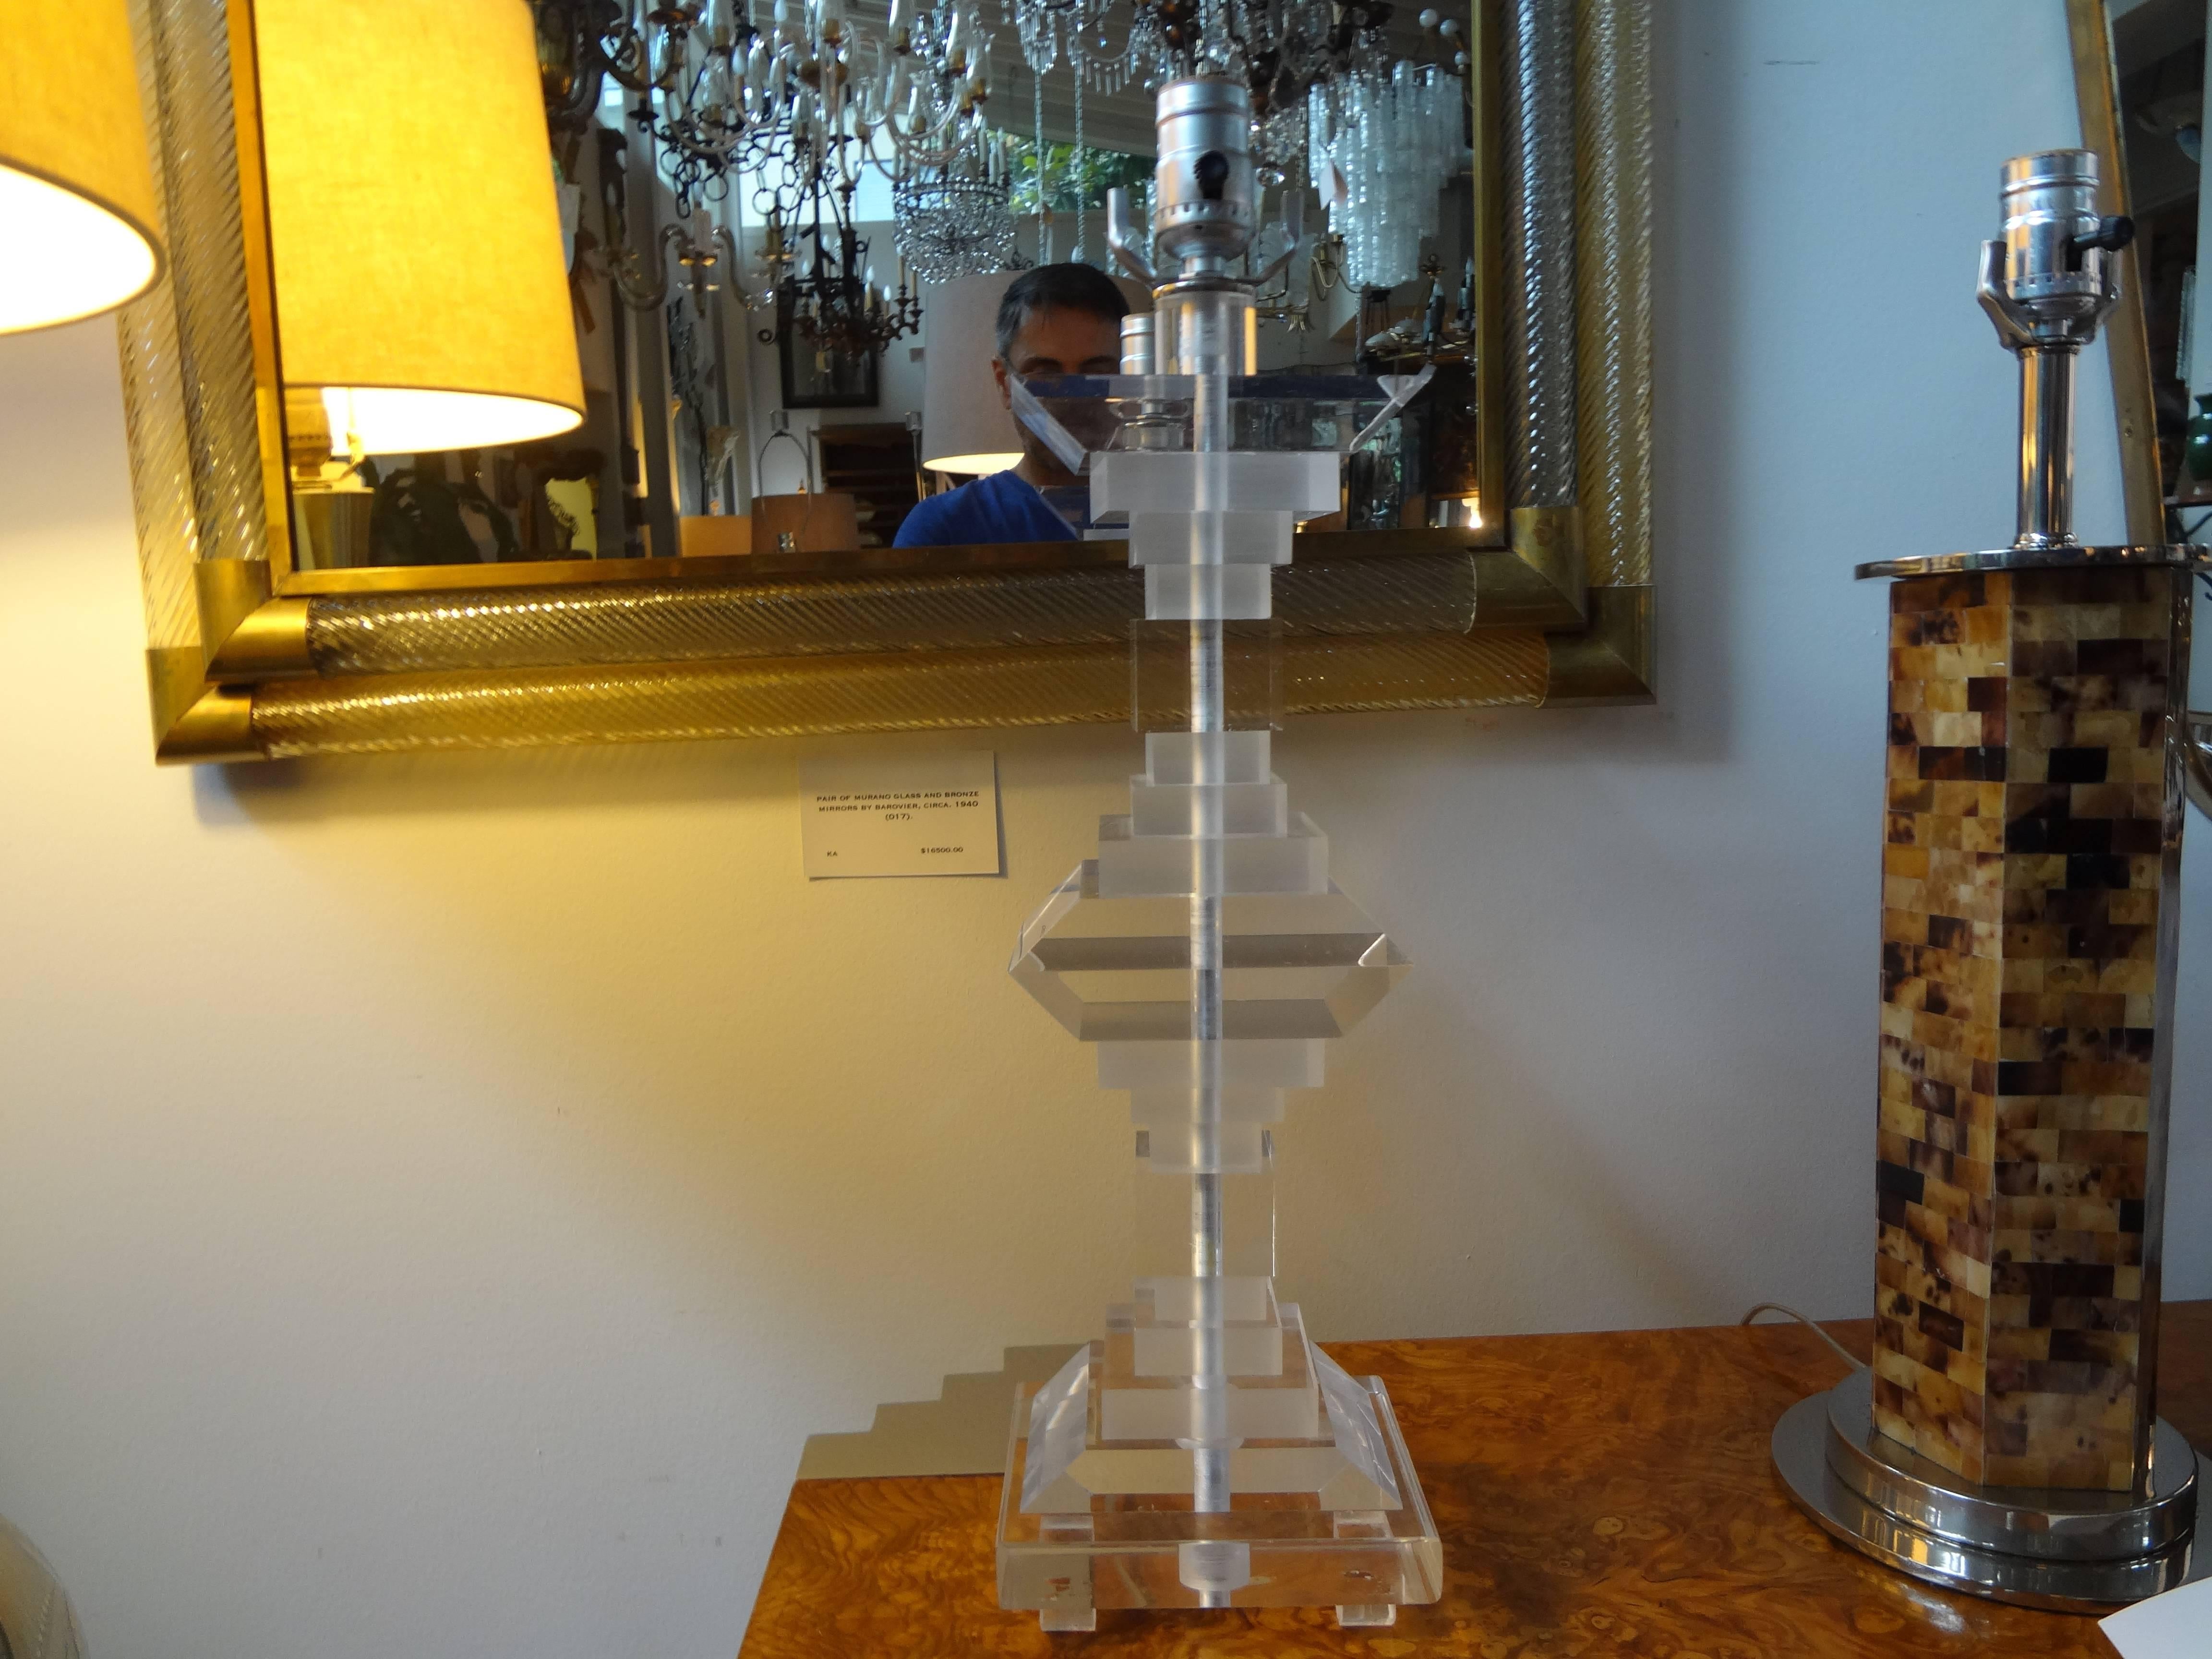 Pair of Mid-Century Modern lucite table lamps.
Stunning pair of Art Deco style stacked lucite or acrylic lamps in the style of Les Prismatiques or Karl Springer. These Hollywood Regency geometric form lamps have been newly wired and date to the